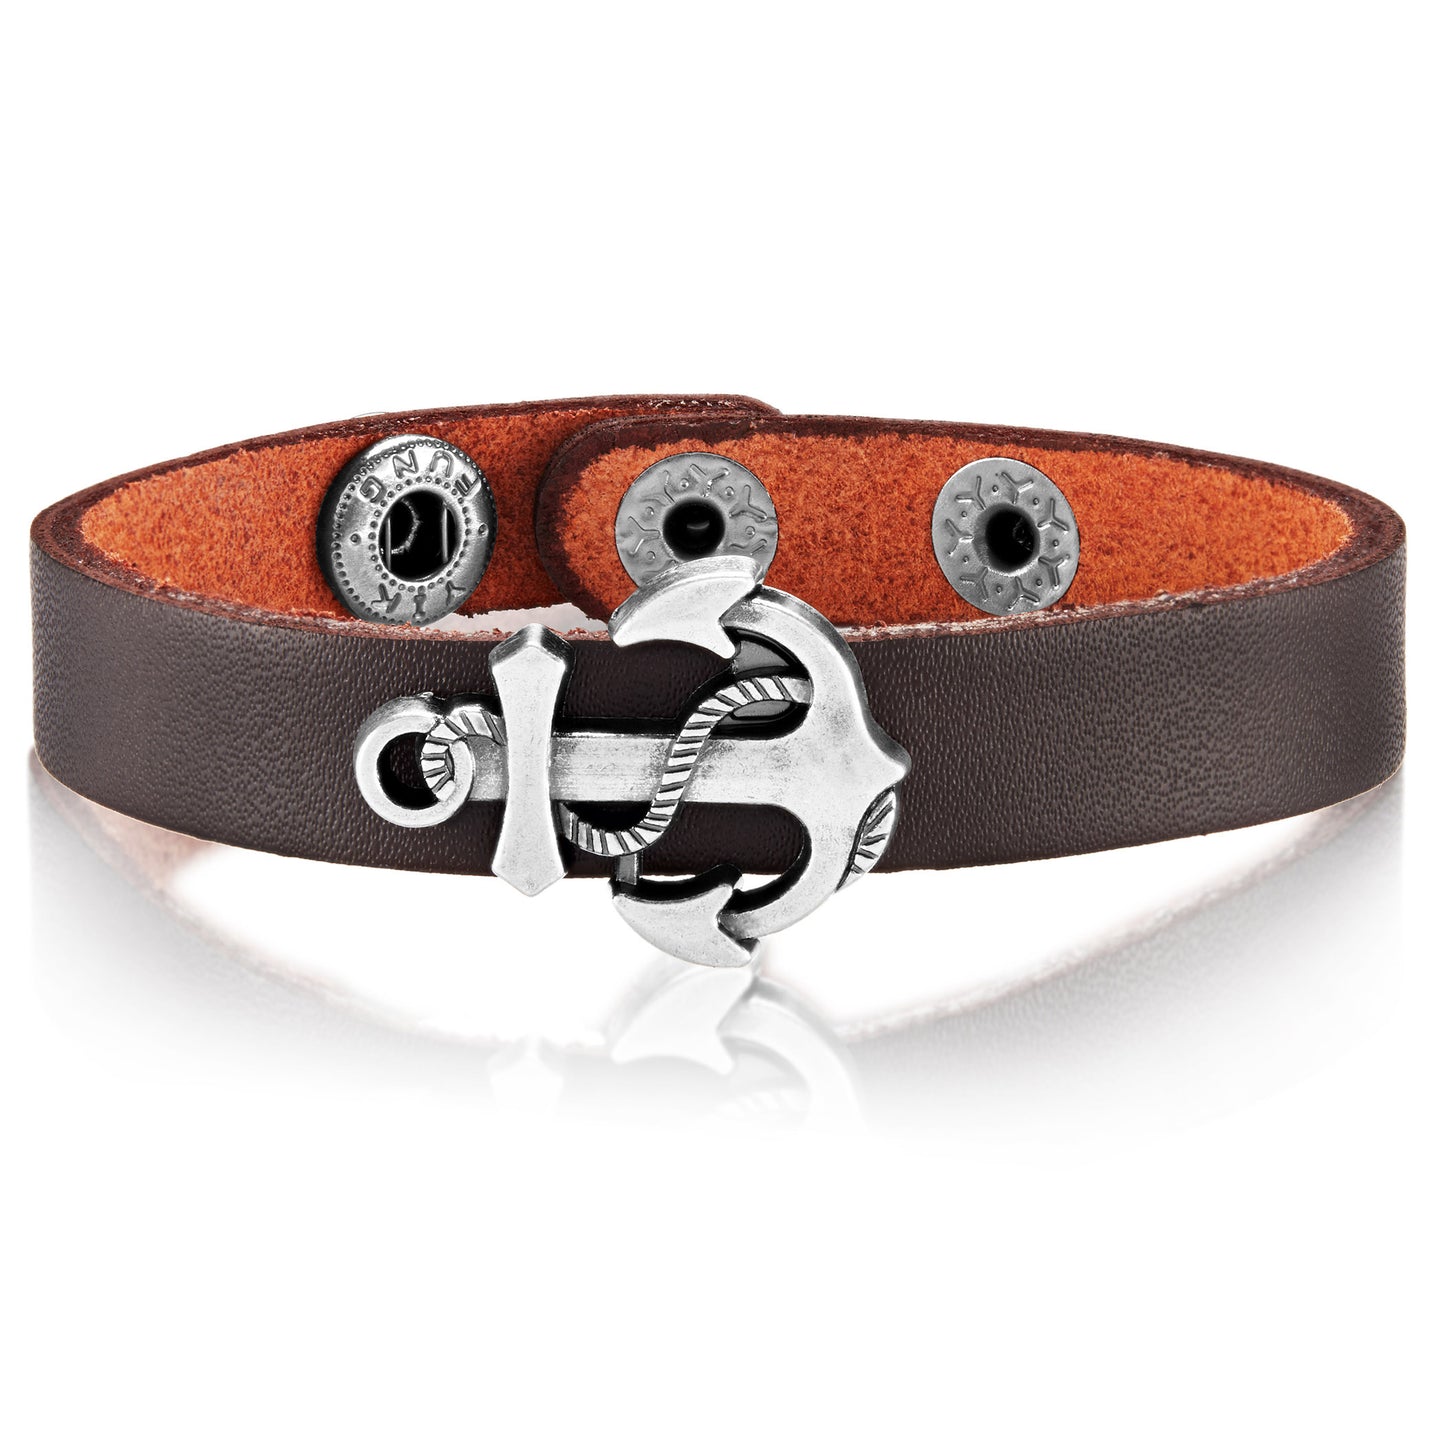 Men's Brown Polished Leather Anchor Charm Cuff Bracelet (22 mm) - 8.75"